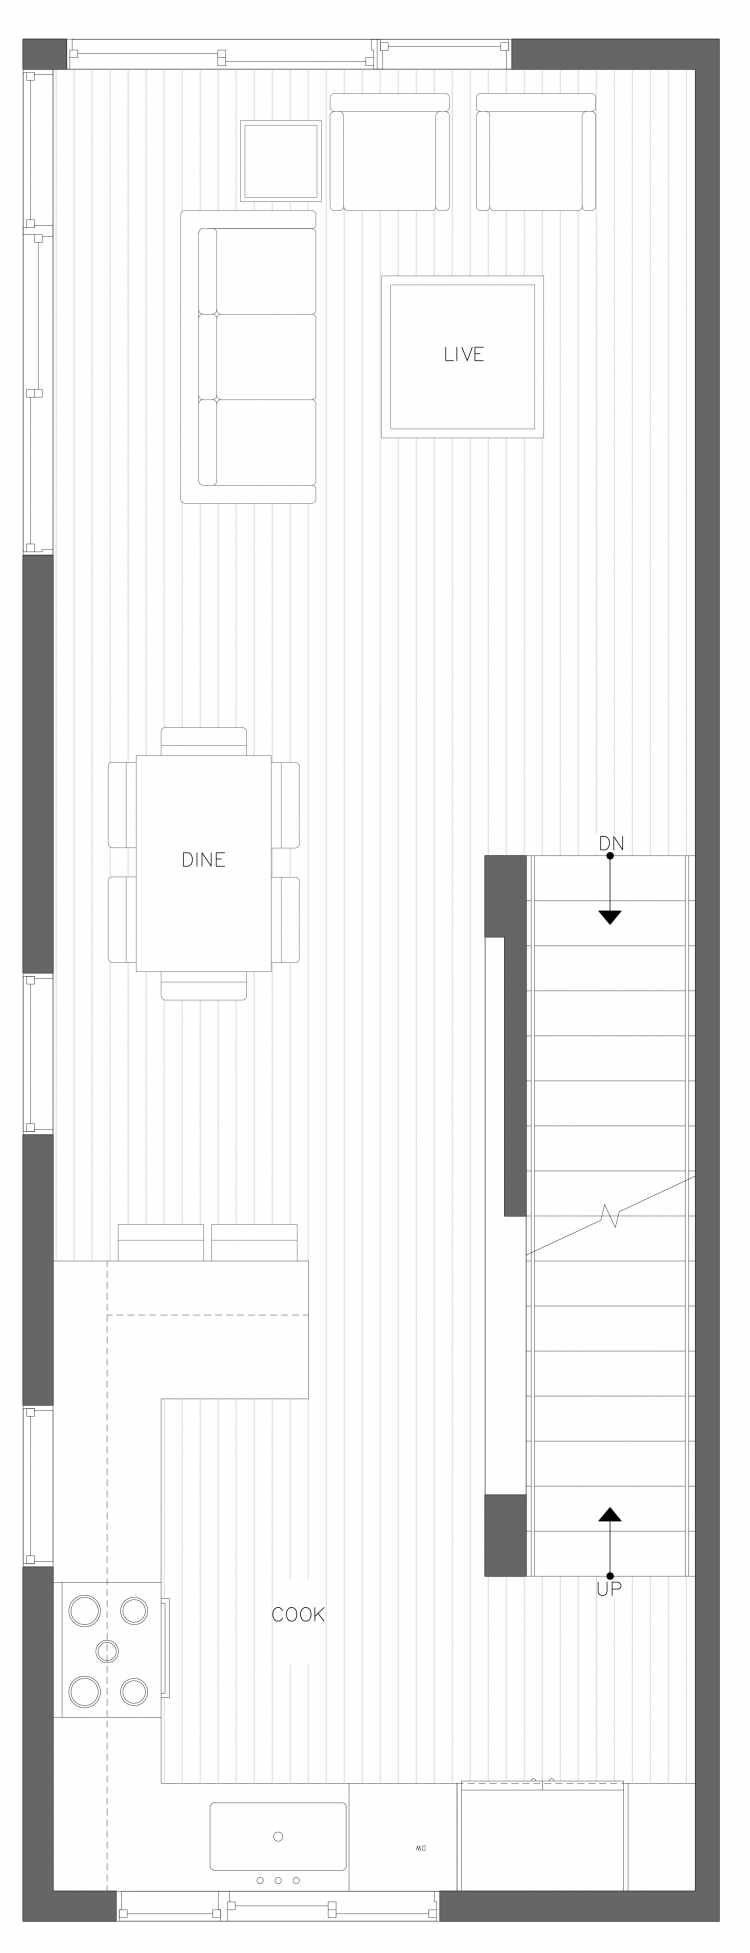 Second Floor Plan of 3406A 15th Ave W, One of the Arlo Townhomes in North Queen Anne